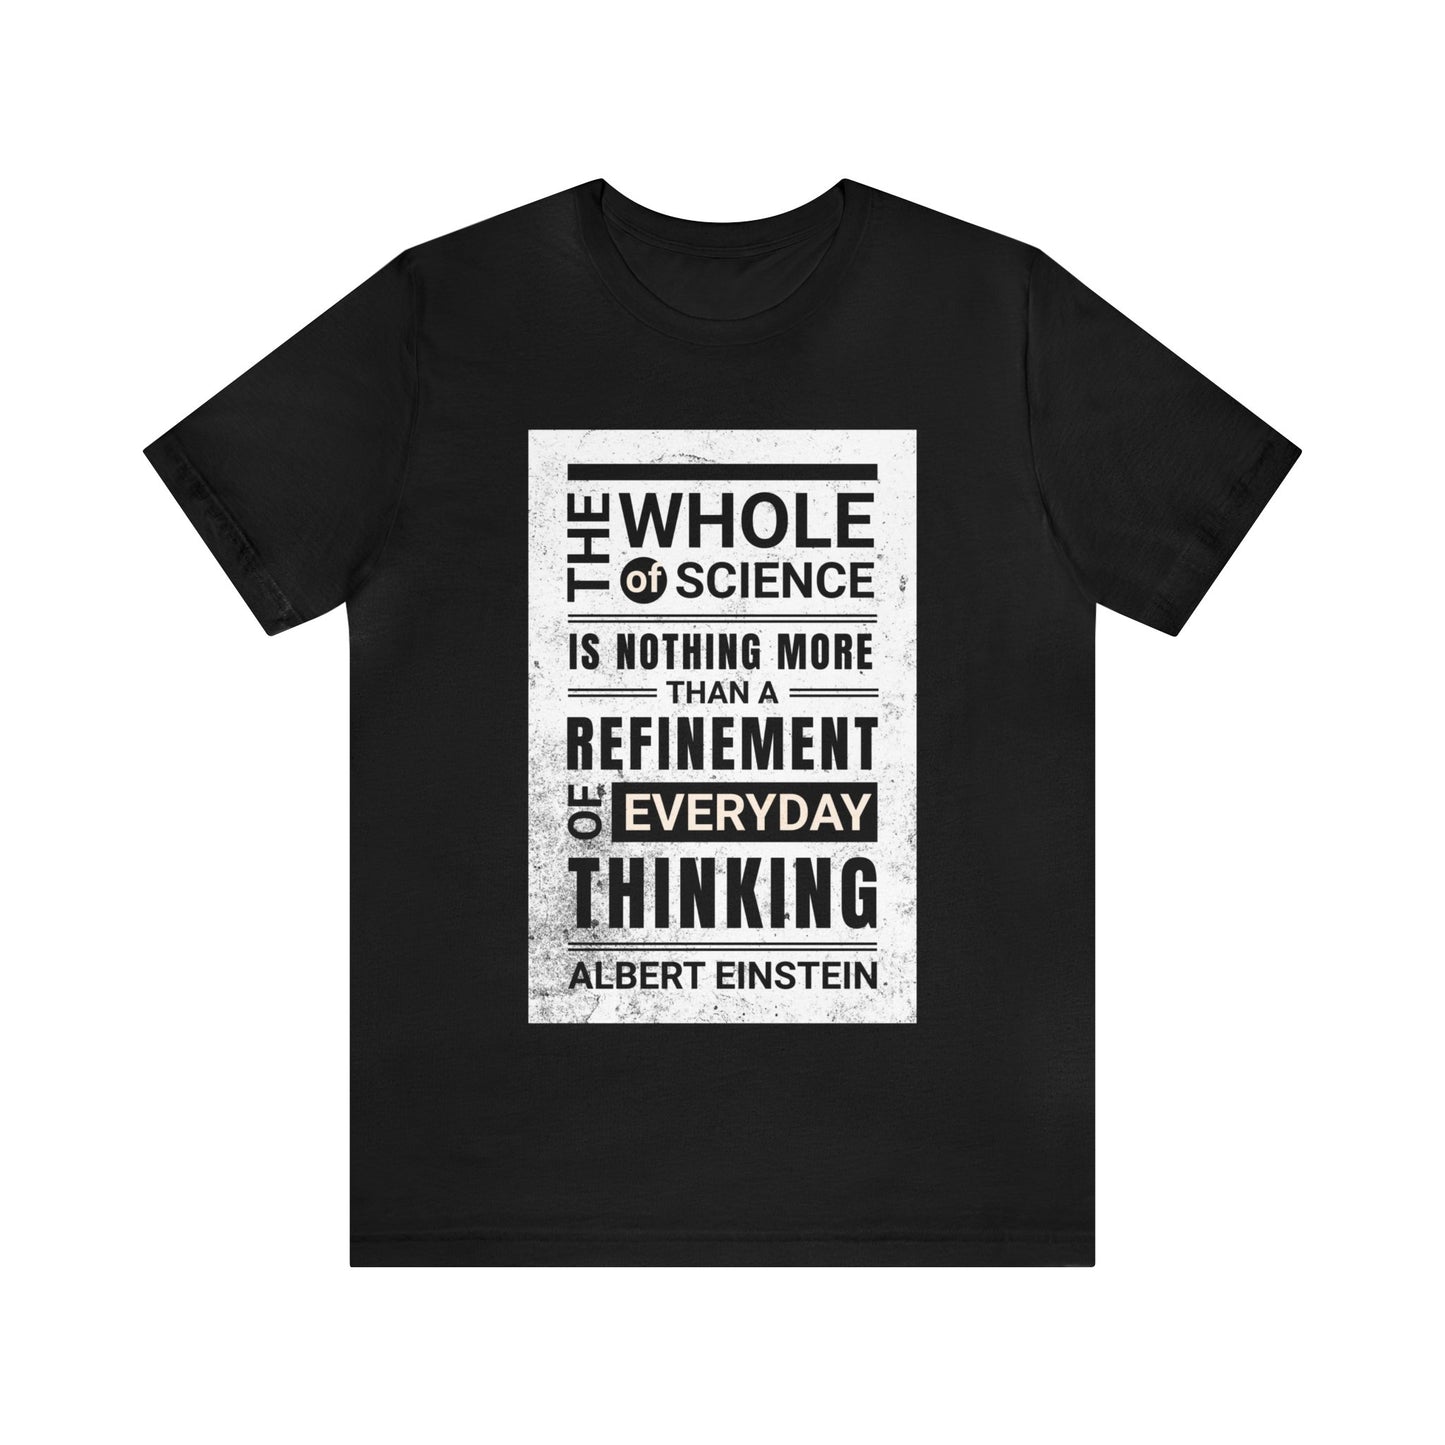 Inspirational Einstein quote t-shirt for science lovers